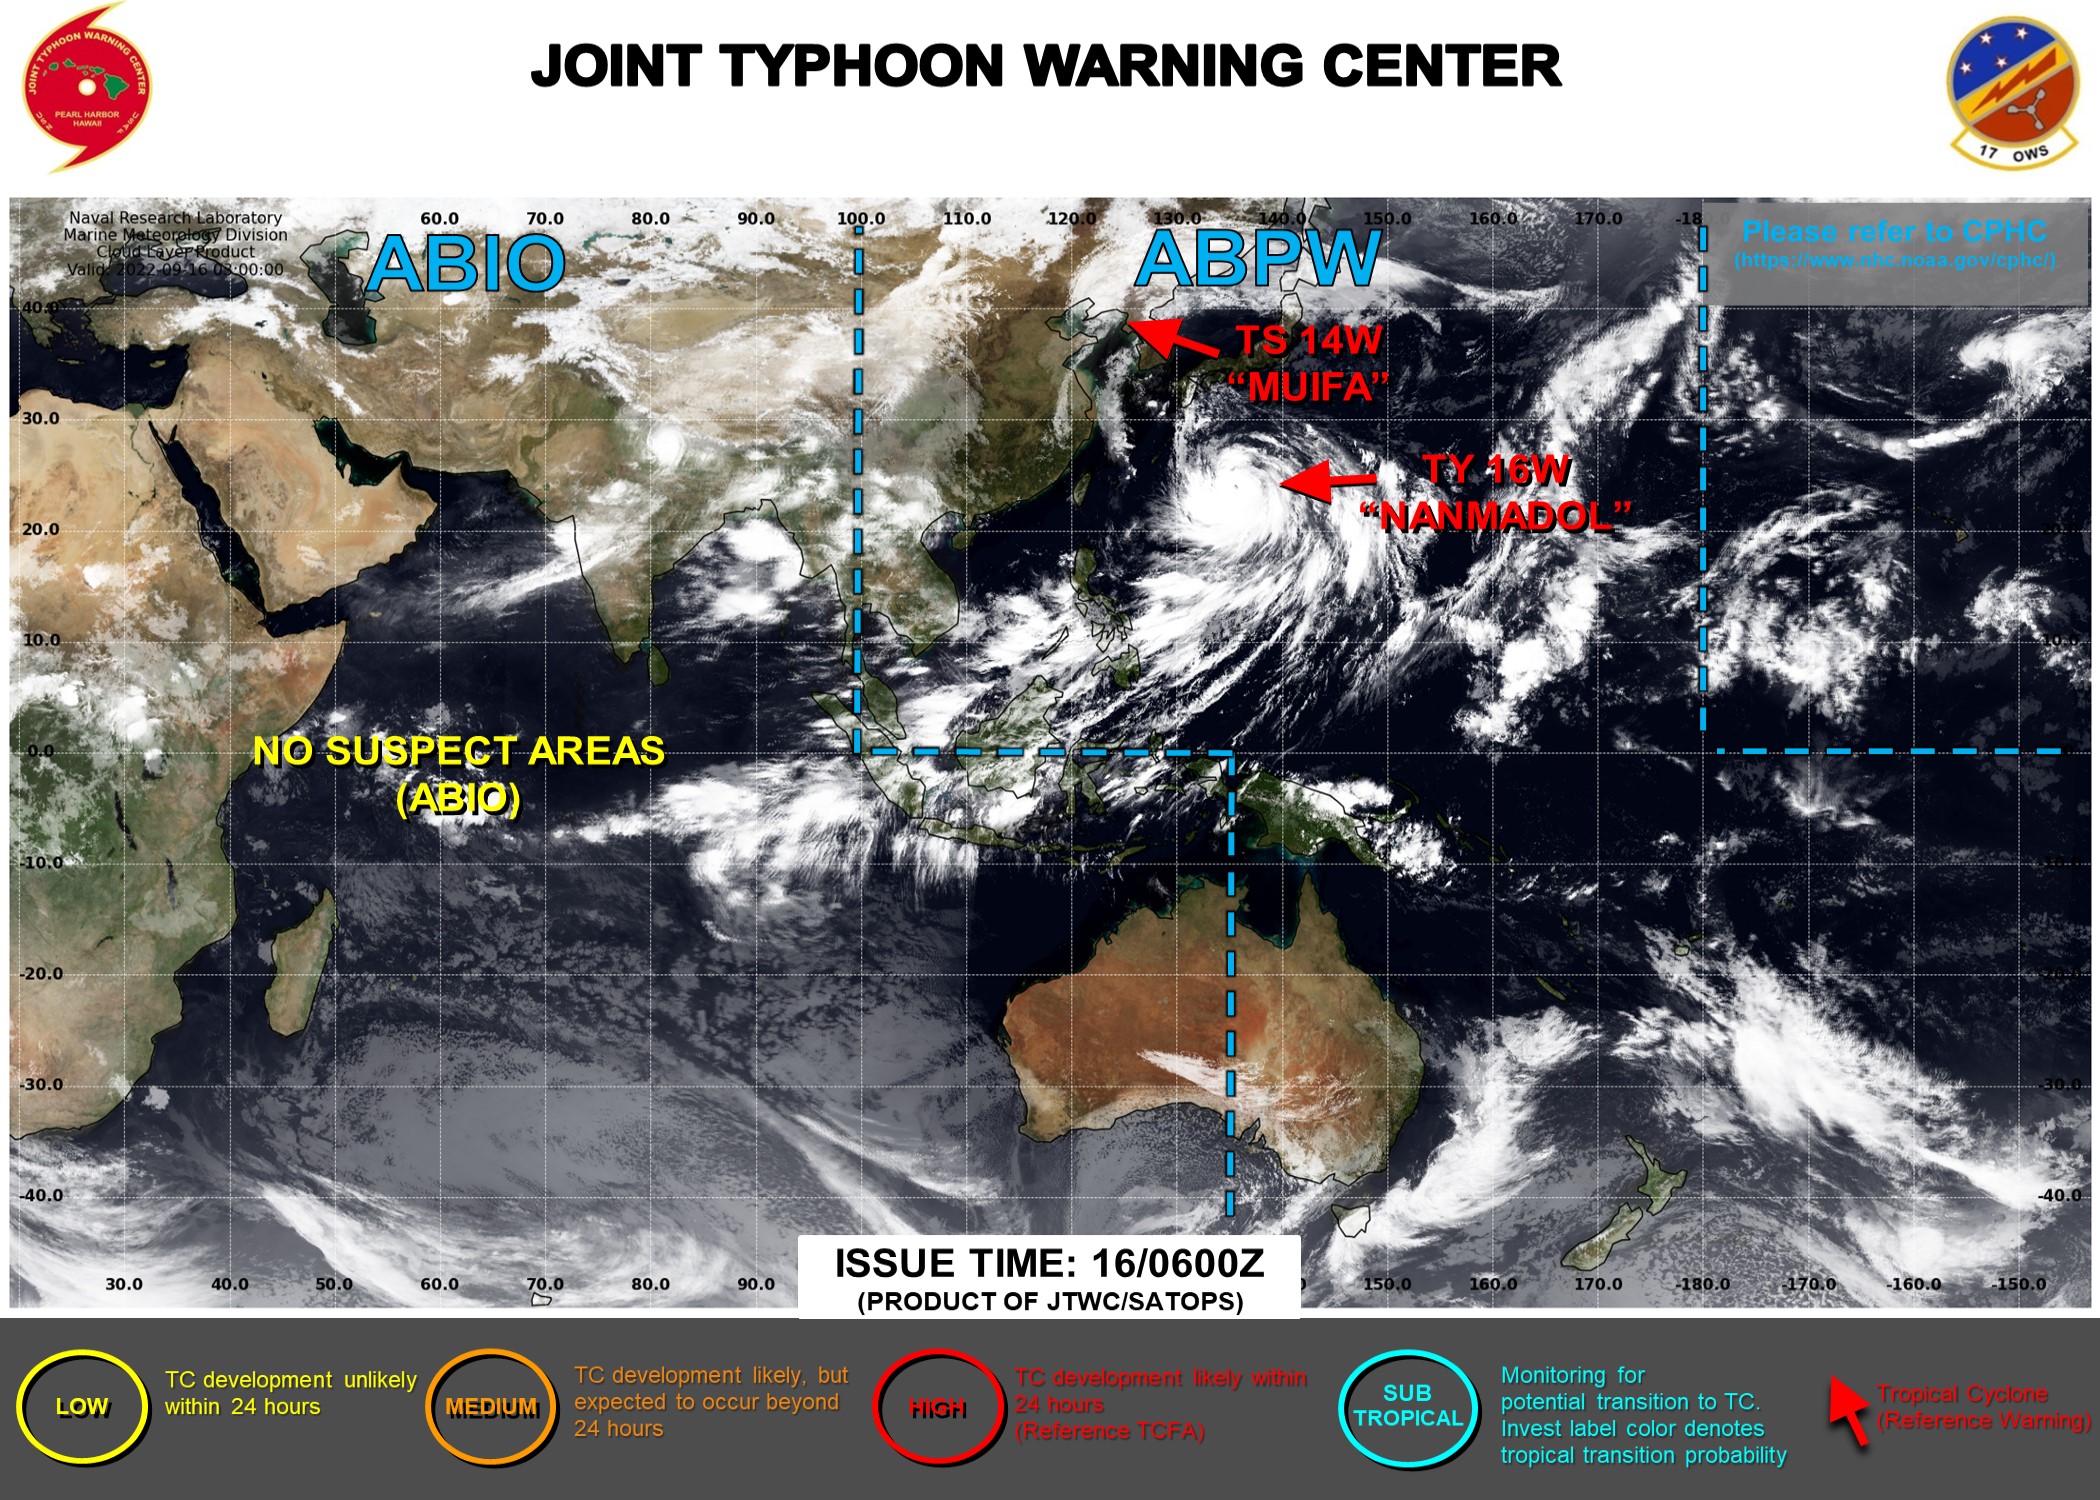 JTWC IS ISSUING 6HOURLY WARNINGS ON 16W(NANMADOL). 3HOURLY SATELLITE BULLETINS ARE ISSUED ON 16W AND 14W(MUIFA).